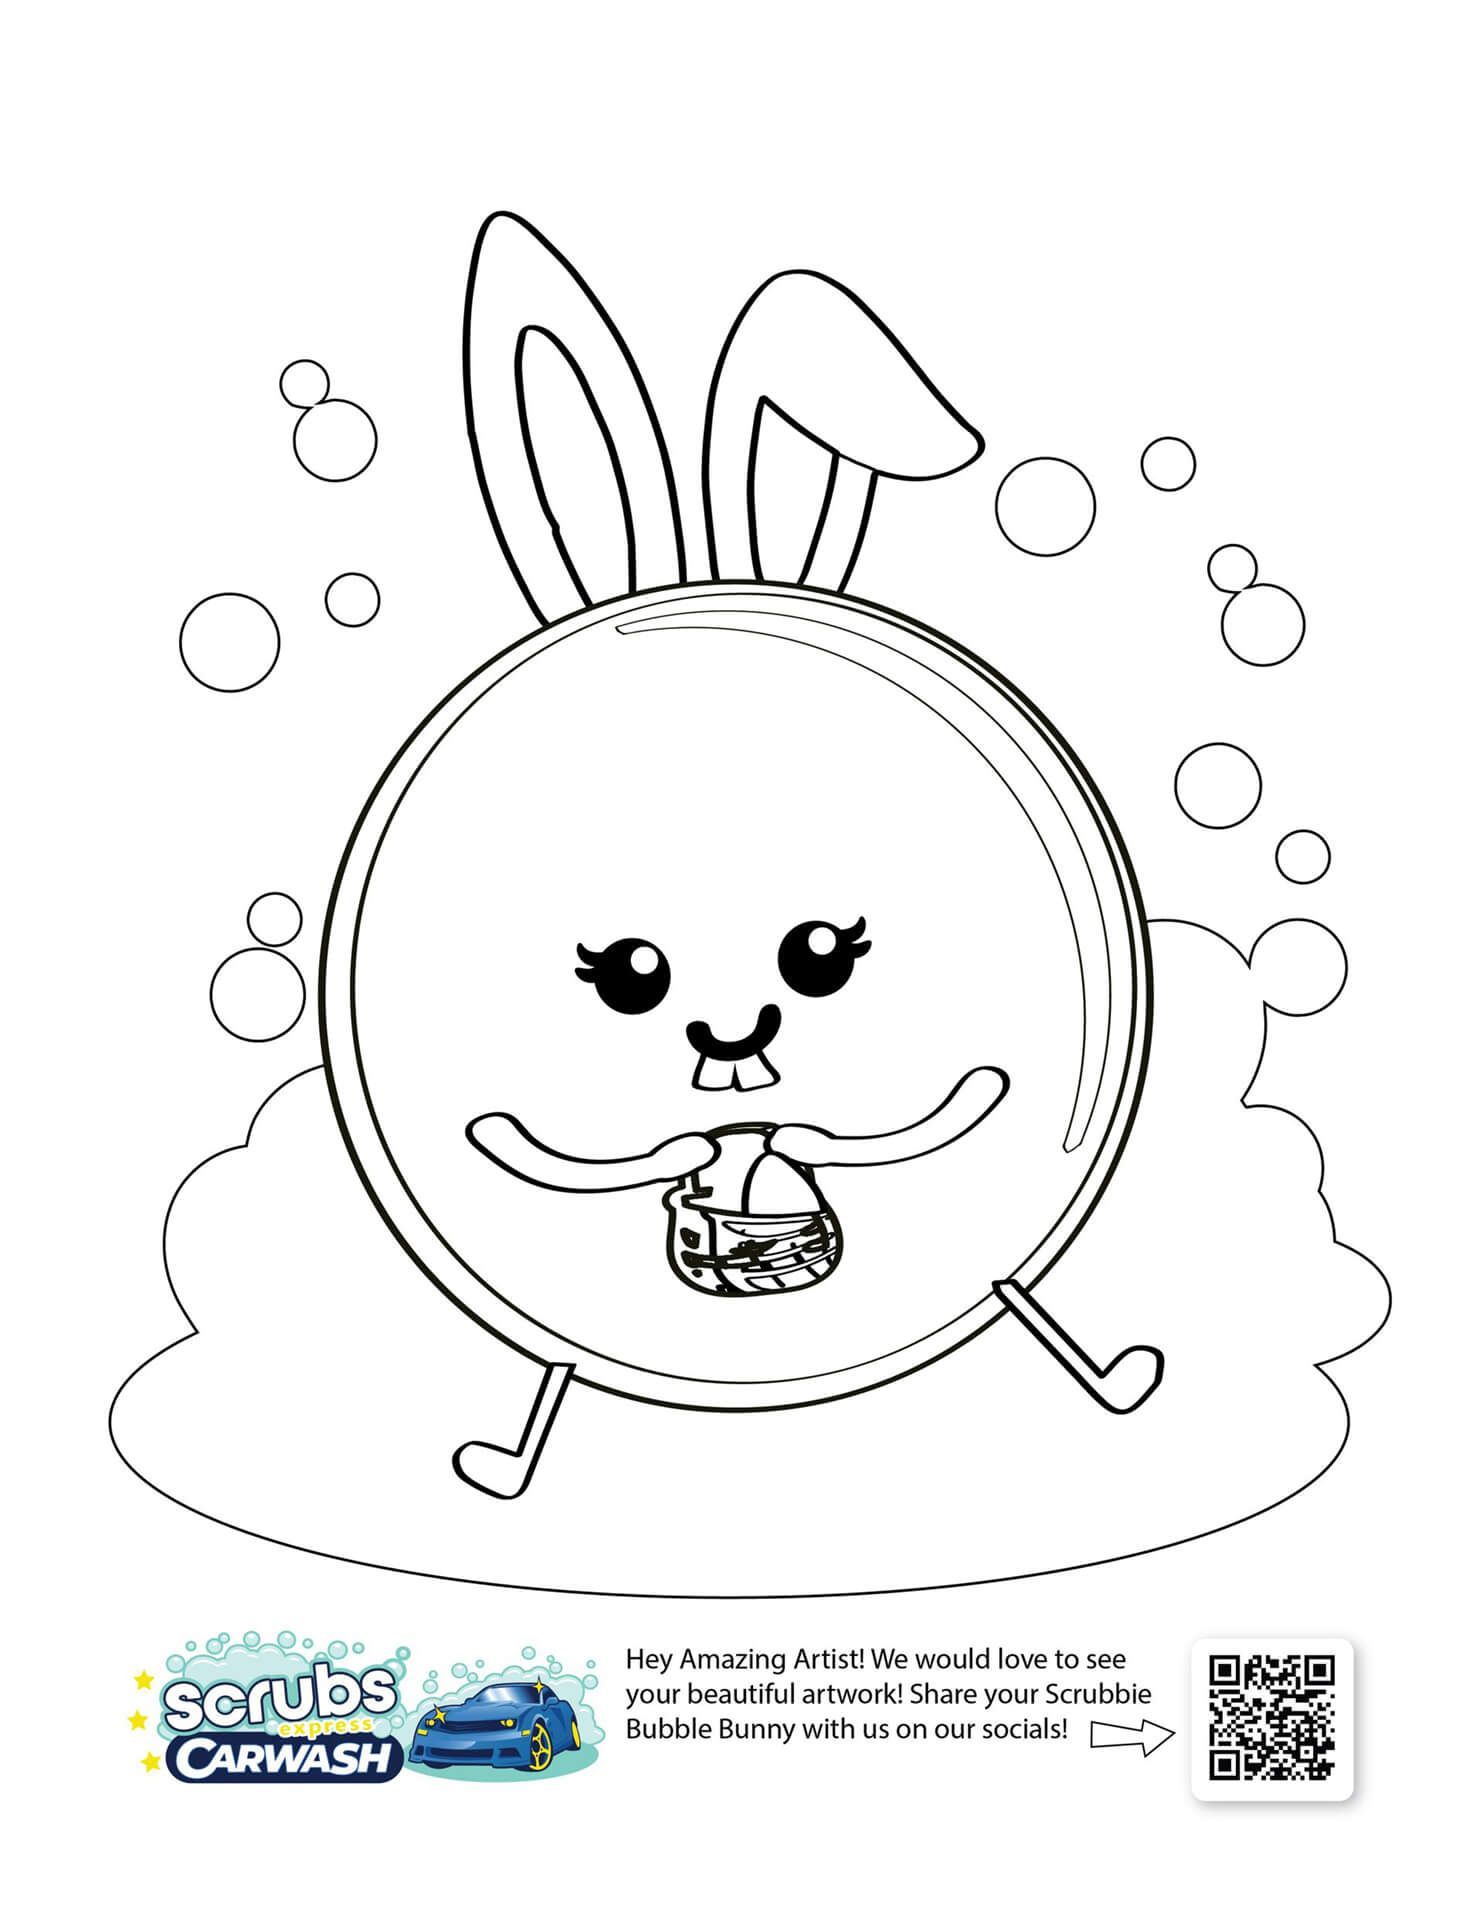 free download and print coloring pages of Scrubbie Bubble from Scrubs Carwash. A black and white drawing of a soap bubble with bunny ears. Easter coloring page.